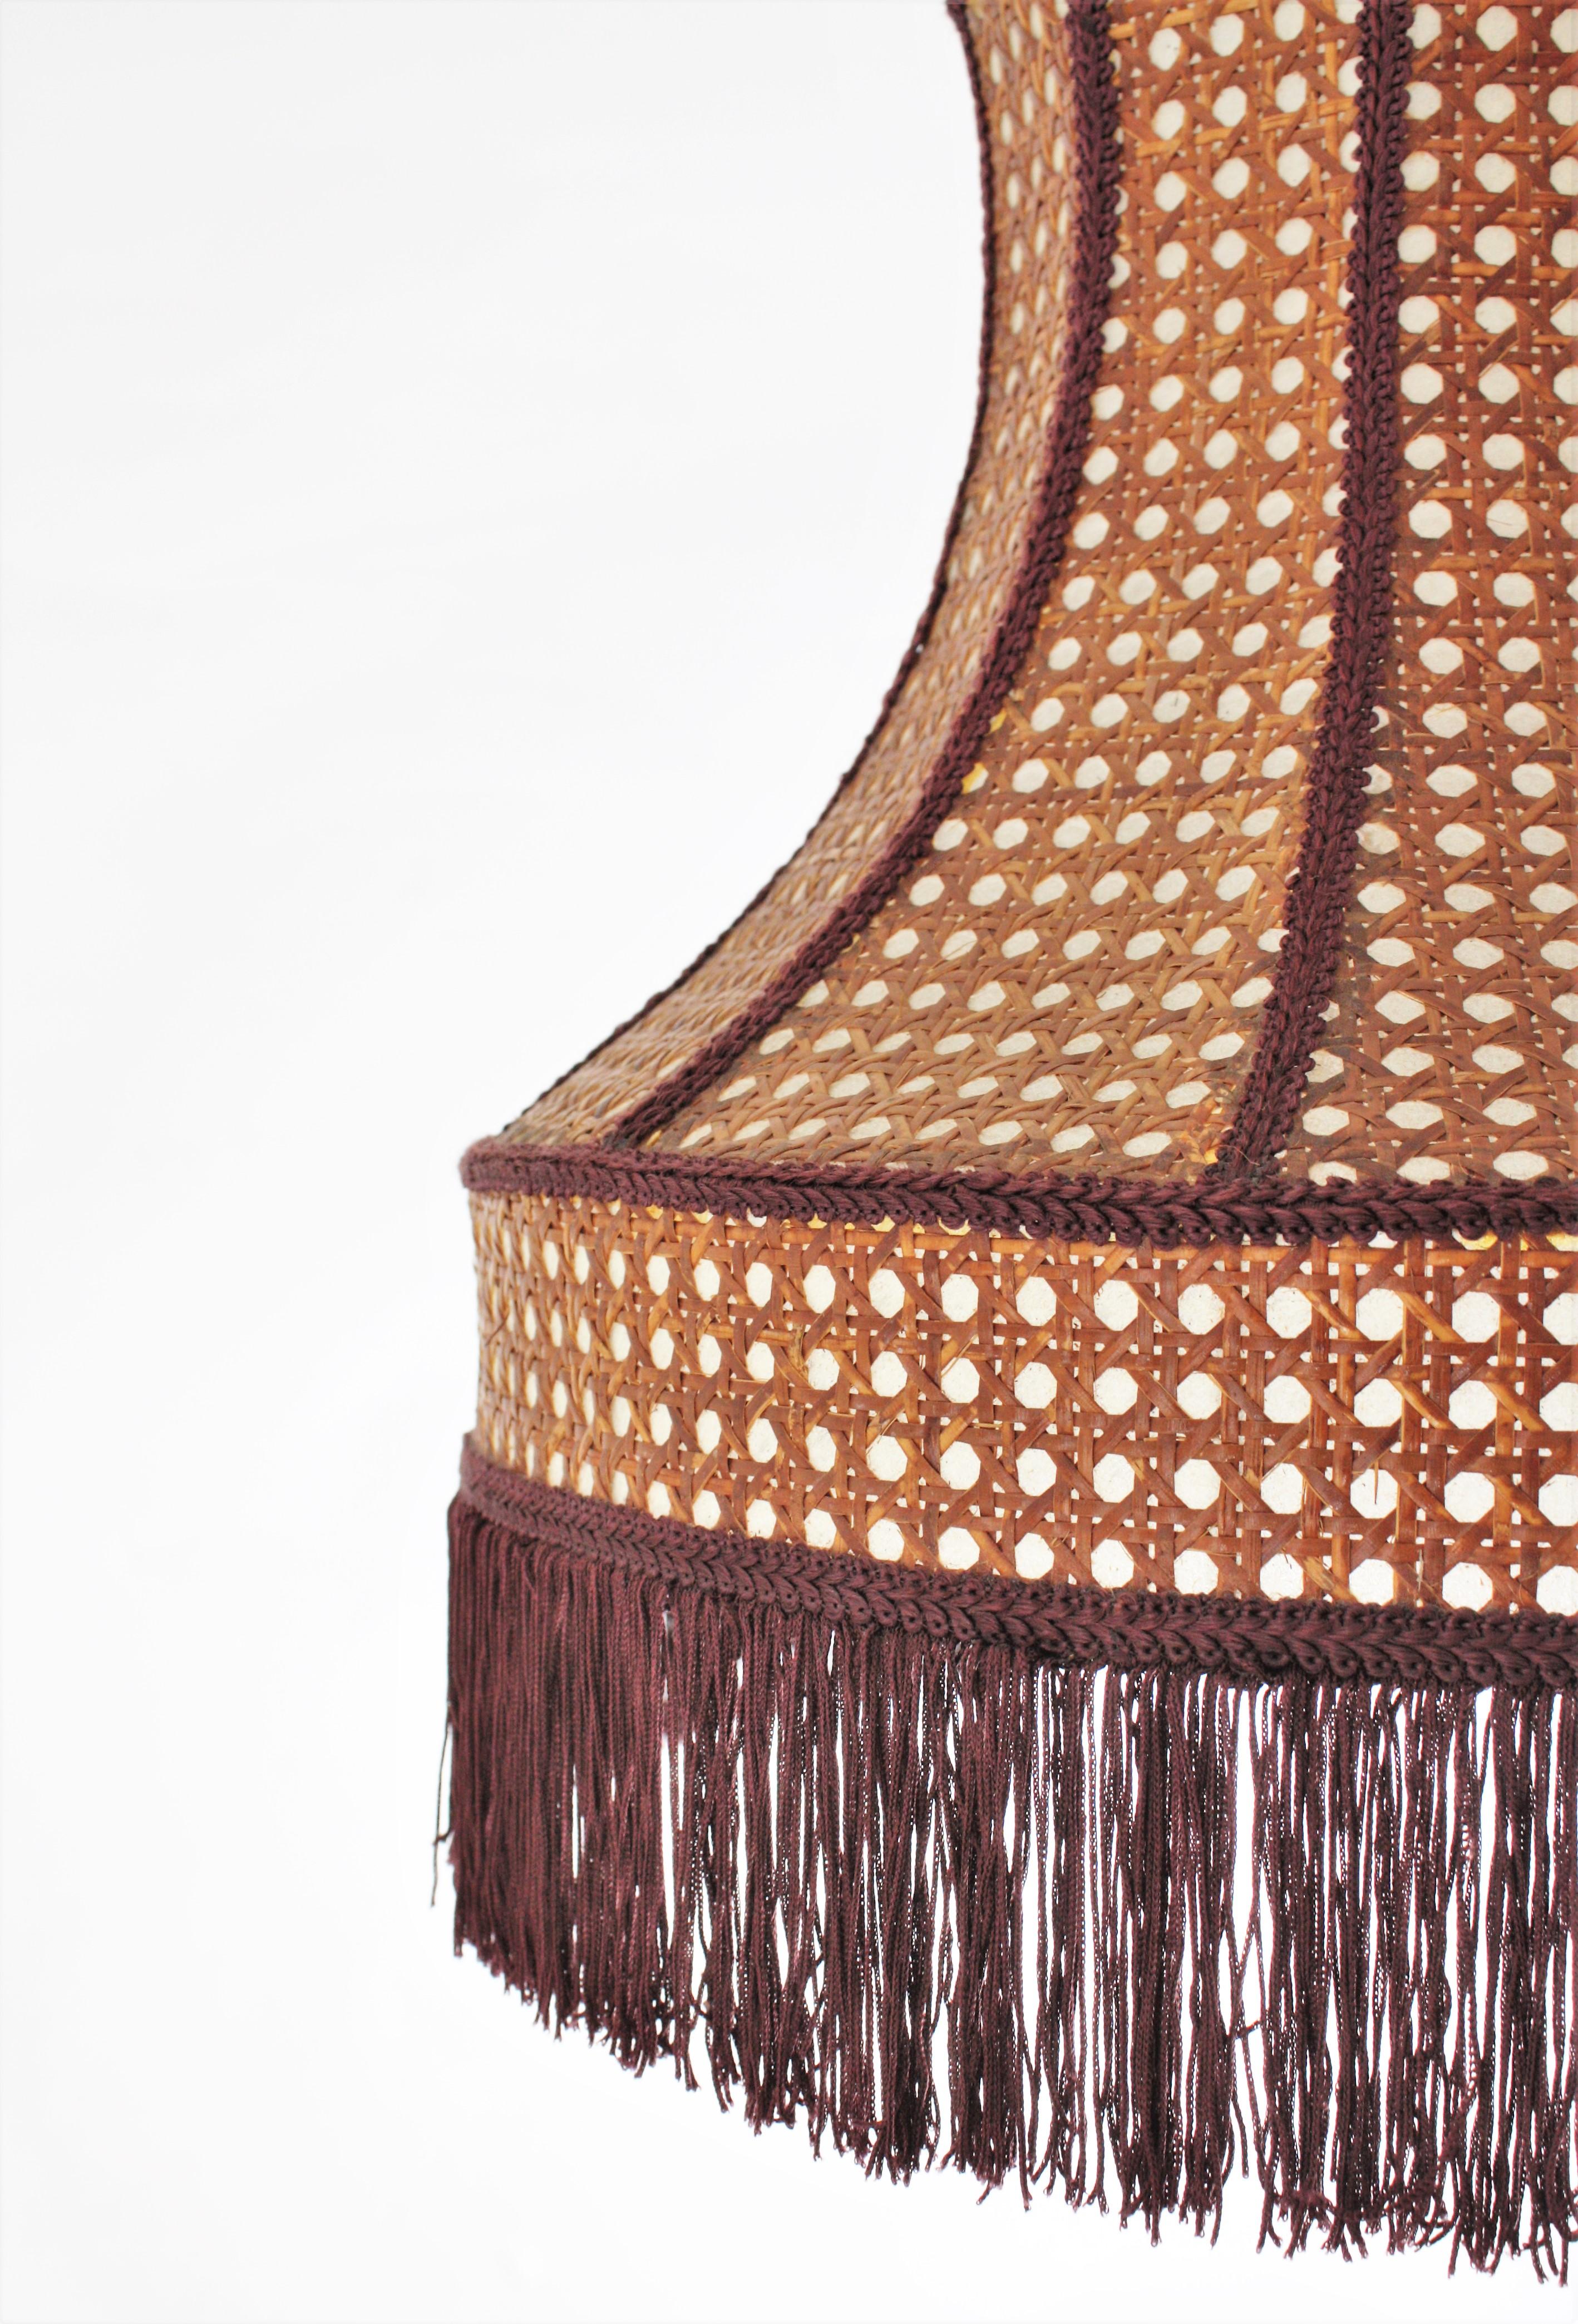 Rattan Wicker Pendant Hanging Lamp with Pagoda Shape and Fringed Bottom 6